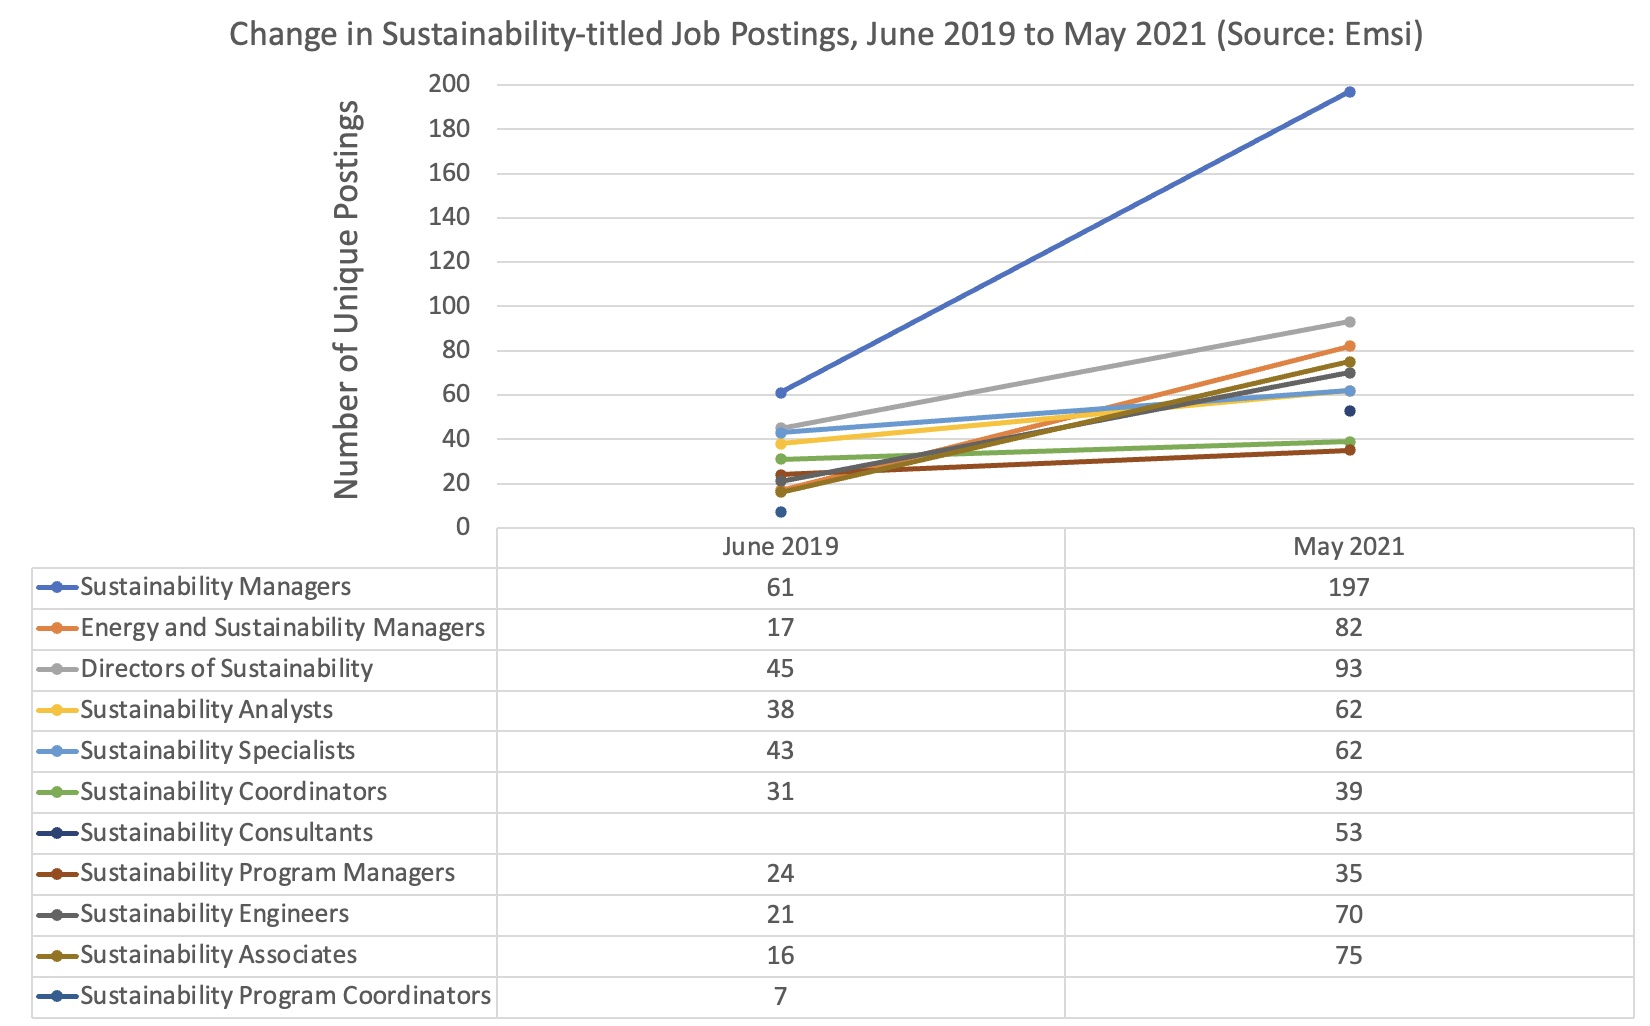 This is a chart showing the top 10 jobs with the word "sustainability" in the title. The chart compares the numbers from June 2019 to May 2021